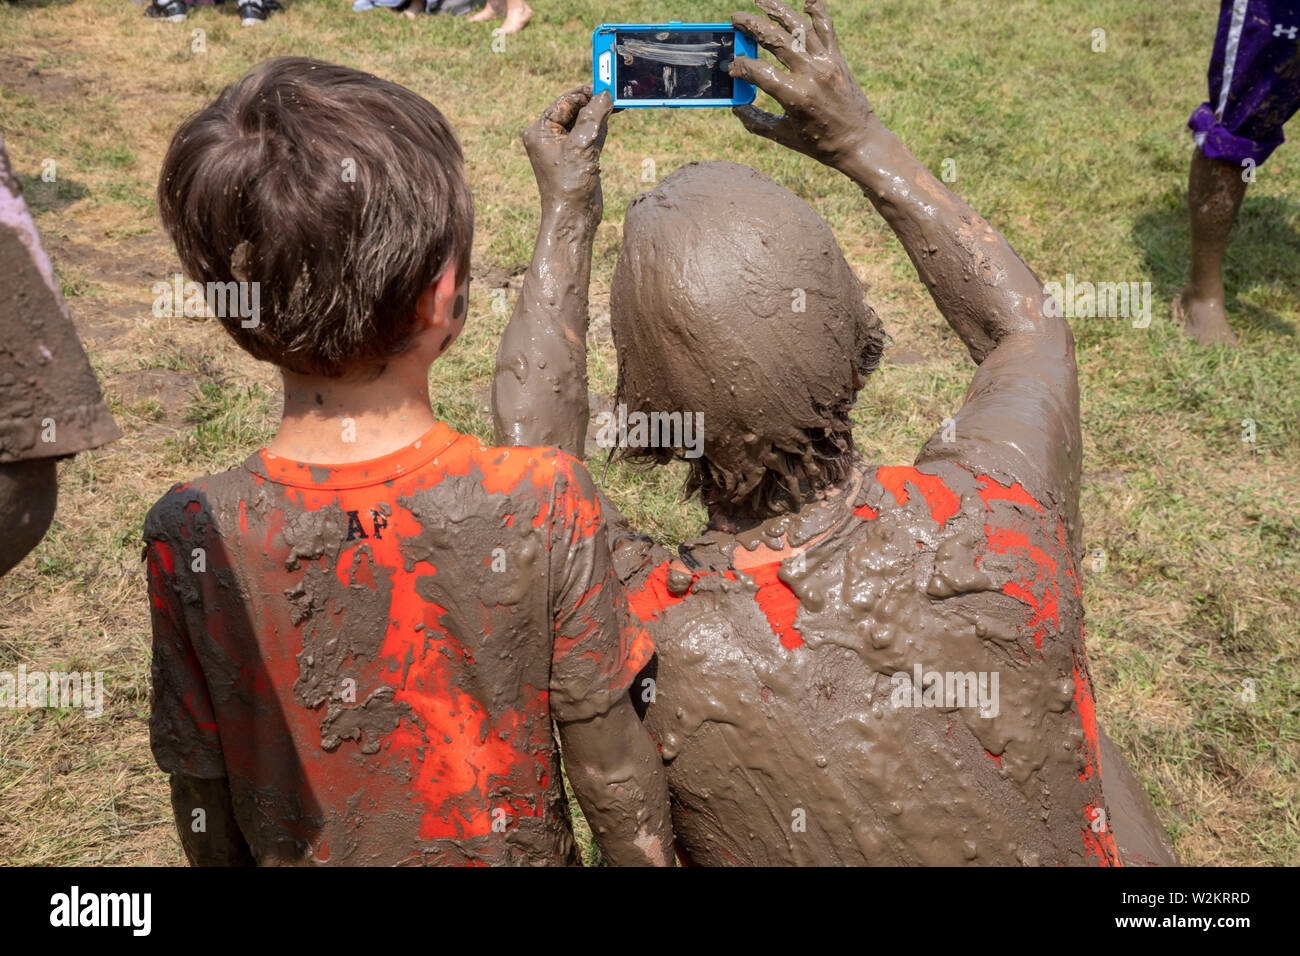 Westland, Michigan - Children age 12 and younger, along with some parents, play in the mud during the annual 'Youth Mud Day' organized by Wayne County Stock Photo